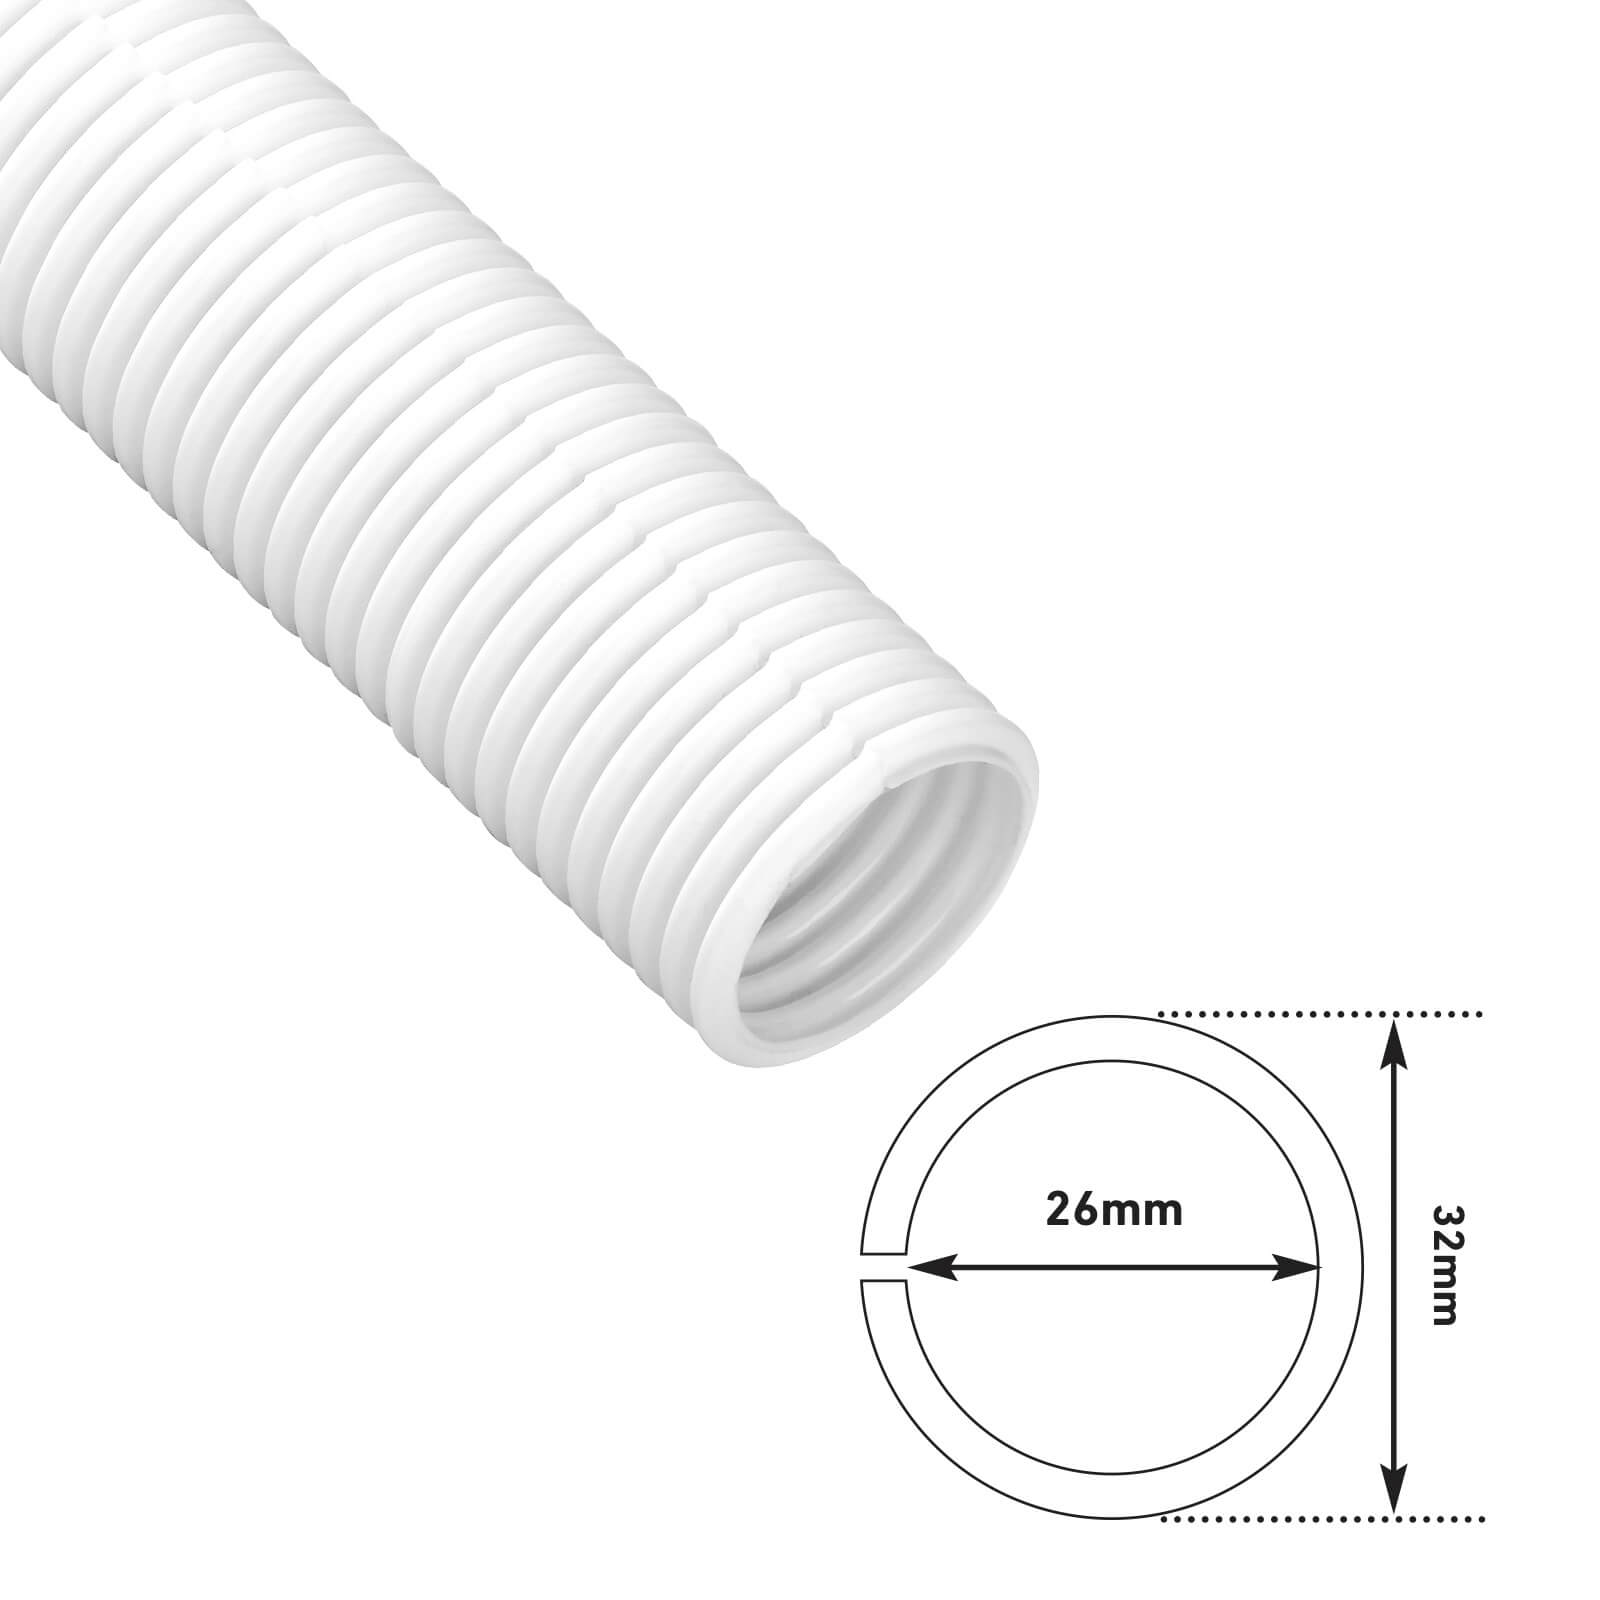 D-Line Cable Tidy Tube 32mm x 1.1m White